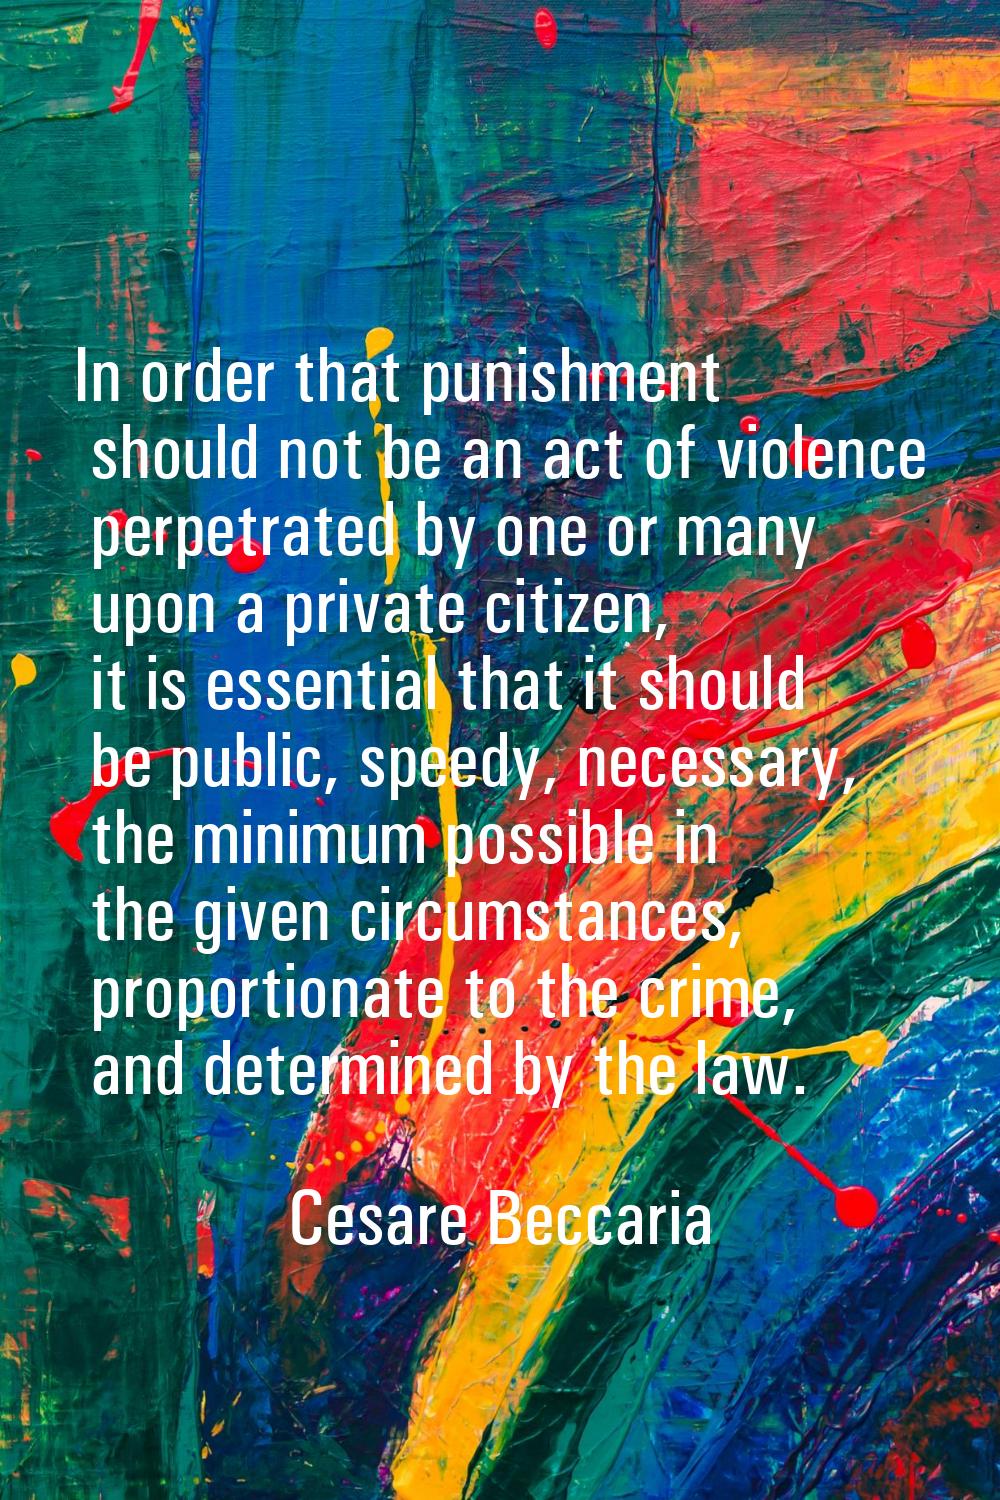 In order that punishment should not be an act of violence perpetrated by one or many upon a private